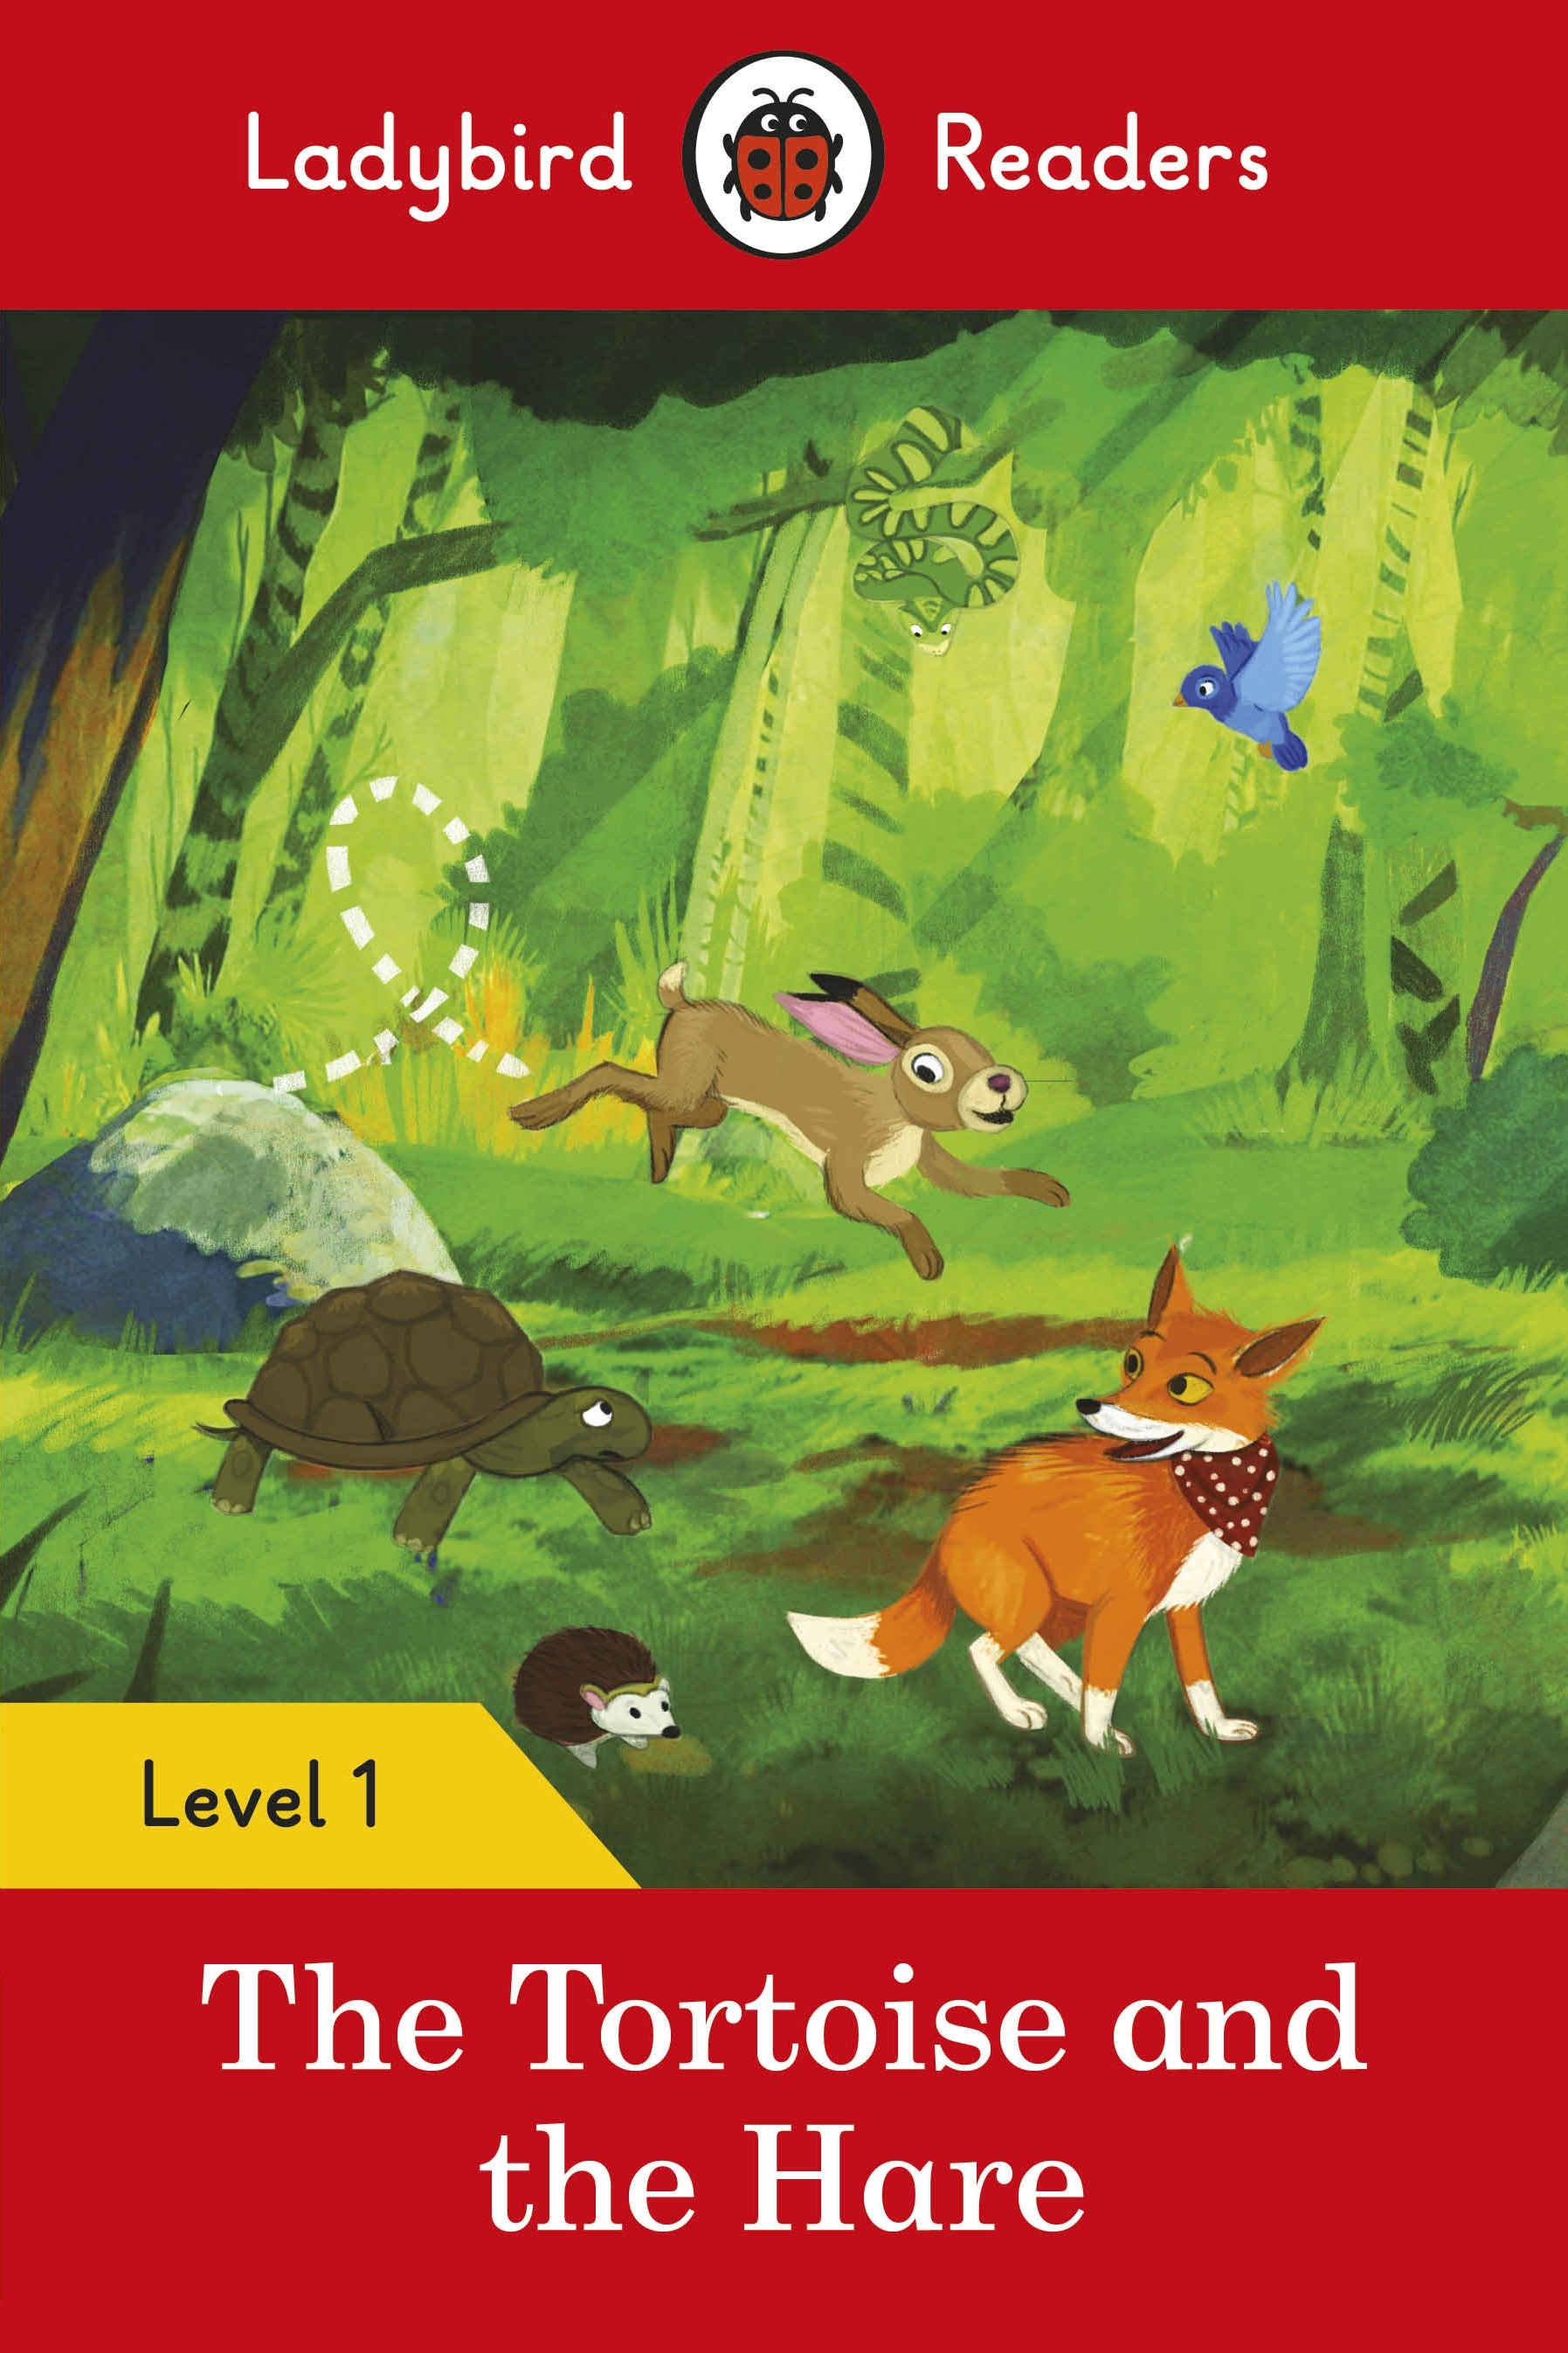 Ladybird Readers Level 1 - The Tortoise and the Hare (ELT Graded Reader